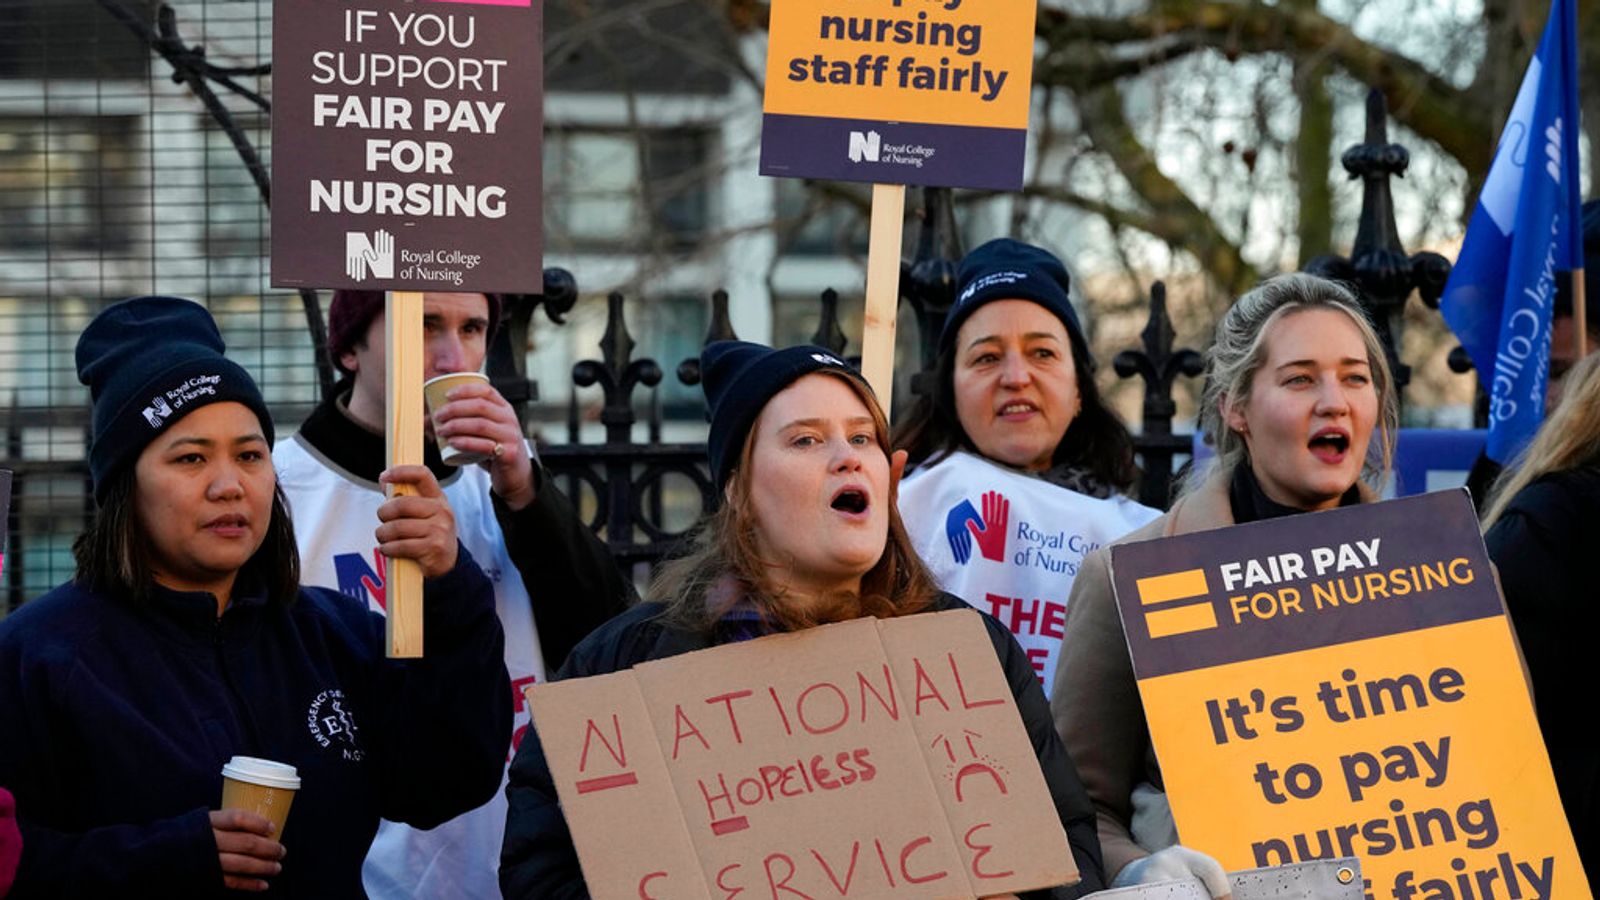 Nurses could be on strike 'up until Christmas', says Royal College of Nursing head Pat Cullen